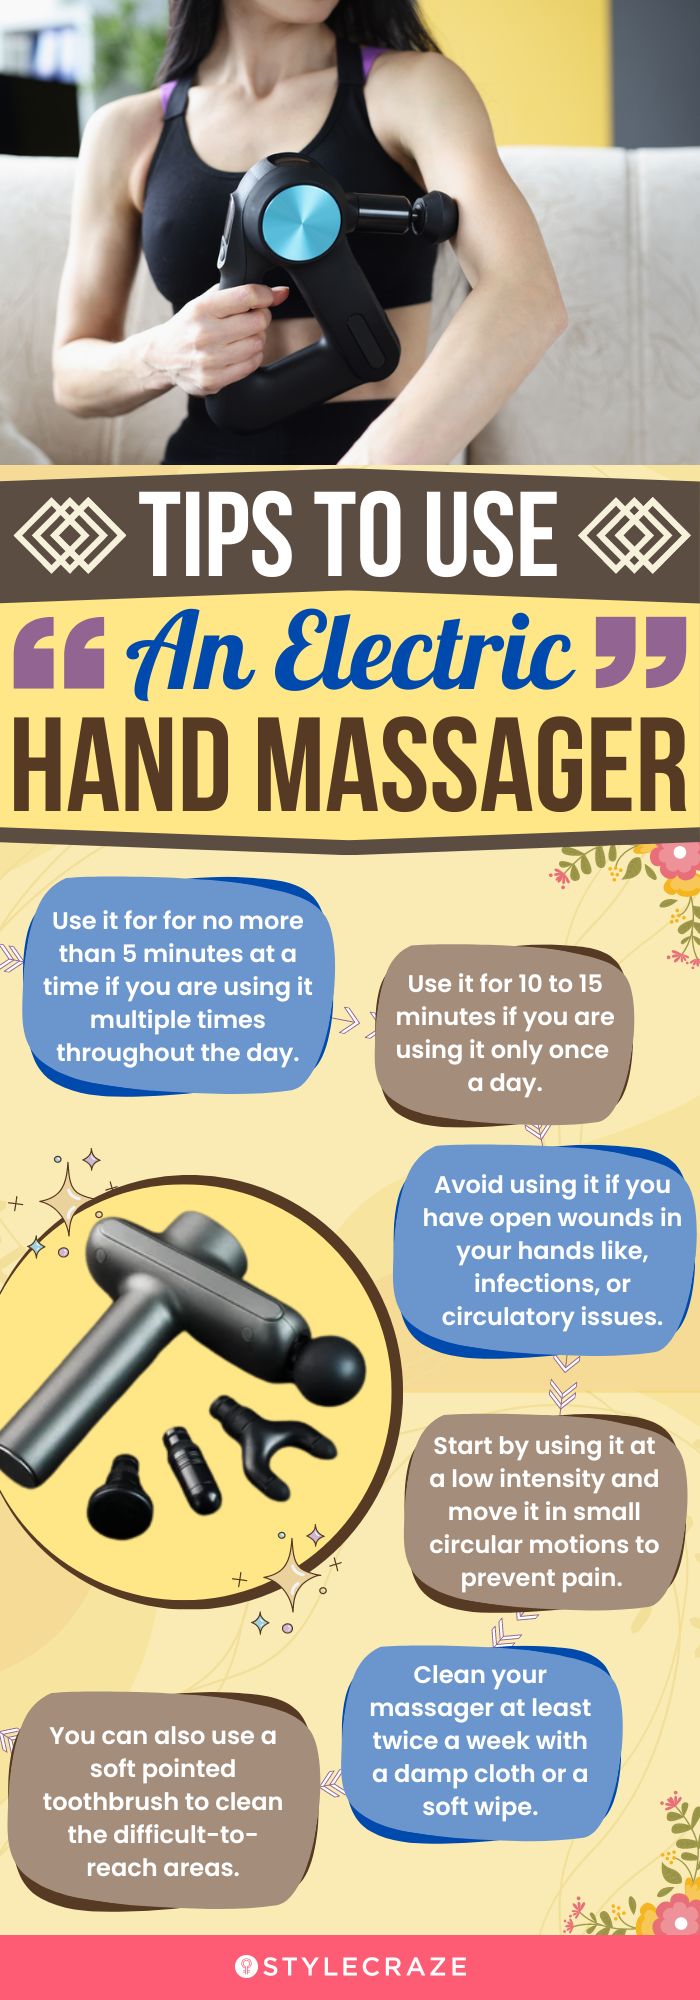 Tips To Use An Electric Hand Massager (infographic)